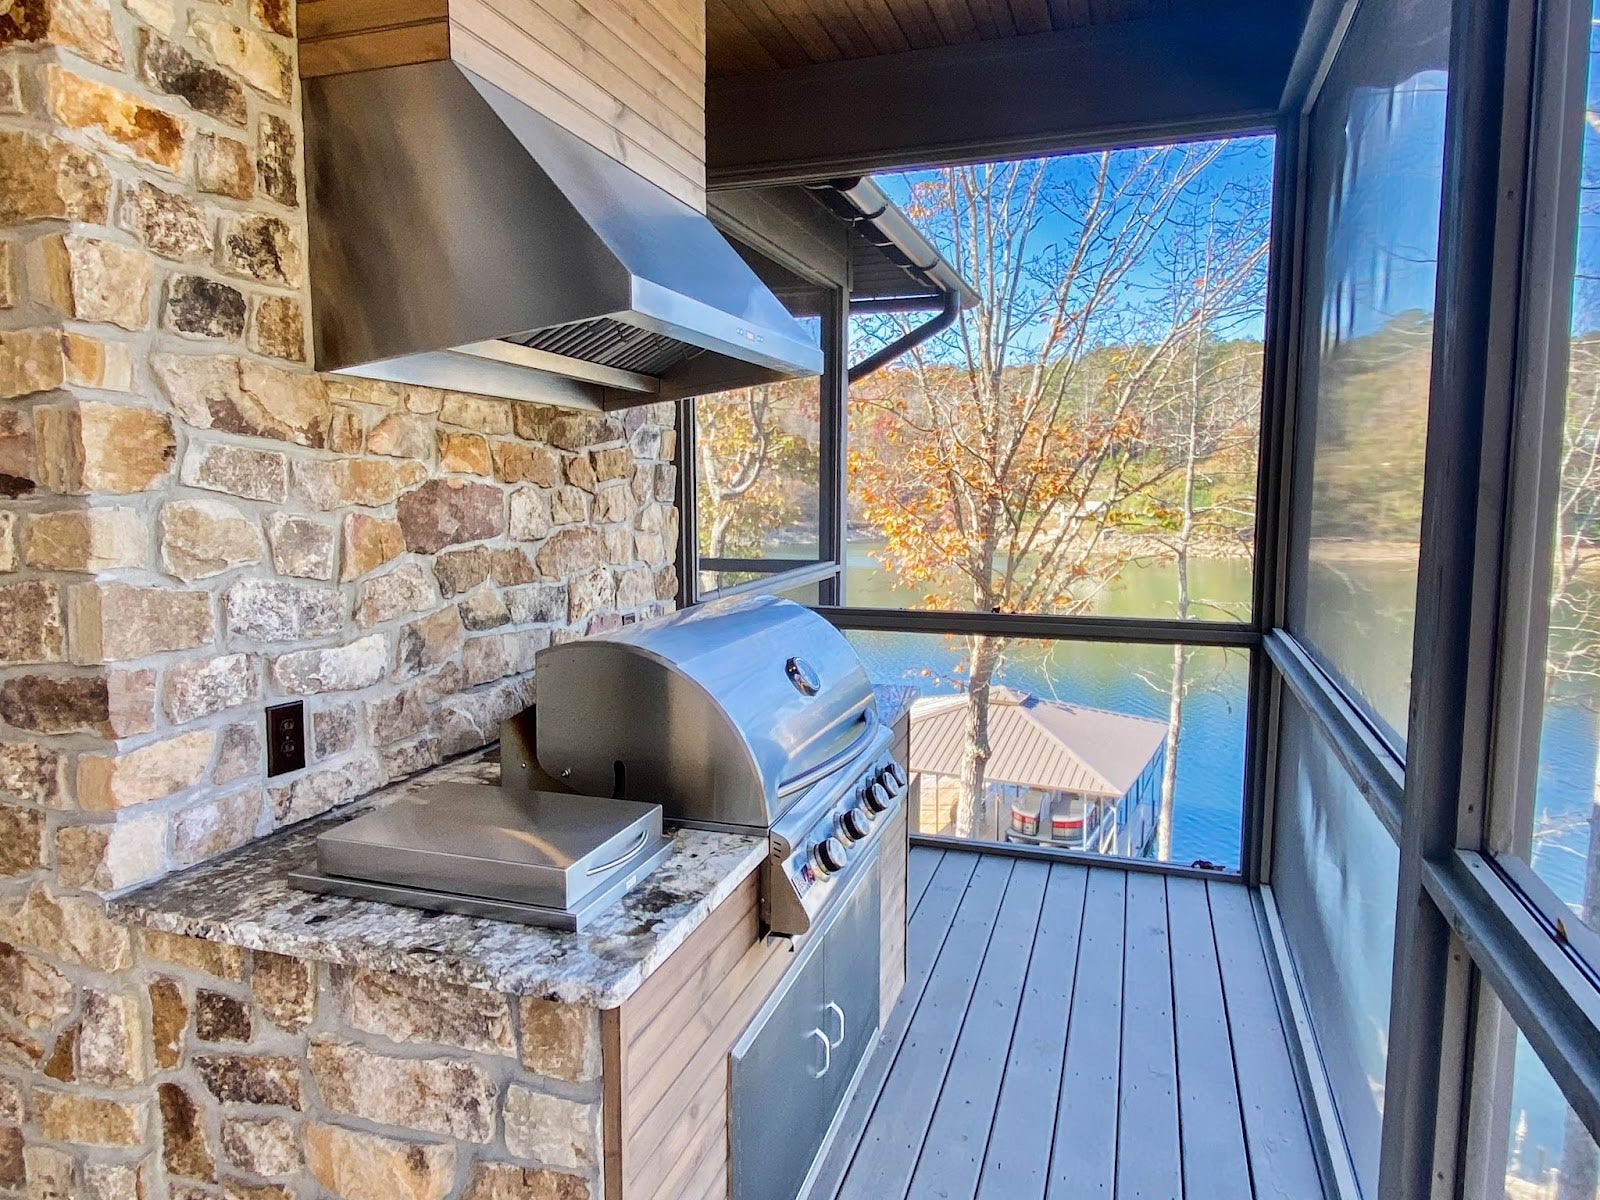 Lakeview Screened Kitchen: Modern screened porch with Proline hood and grill for scenic lakefront cooking. Stone wall and granite countertops create a luxurious feel.  - Proline Range Hoods - prolinerangehoods.com  